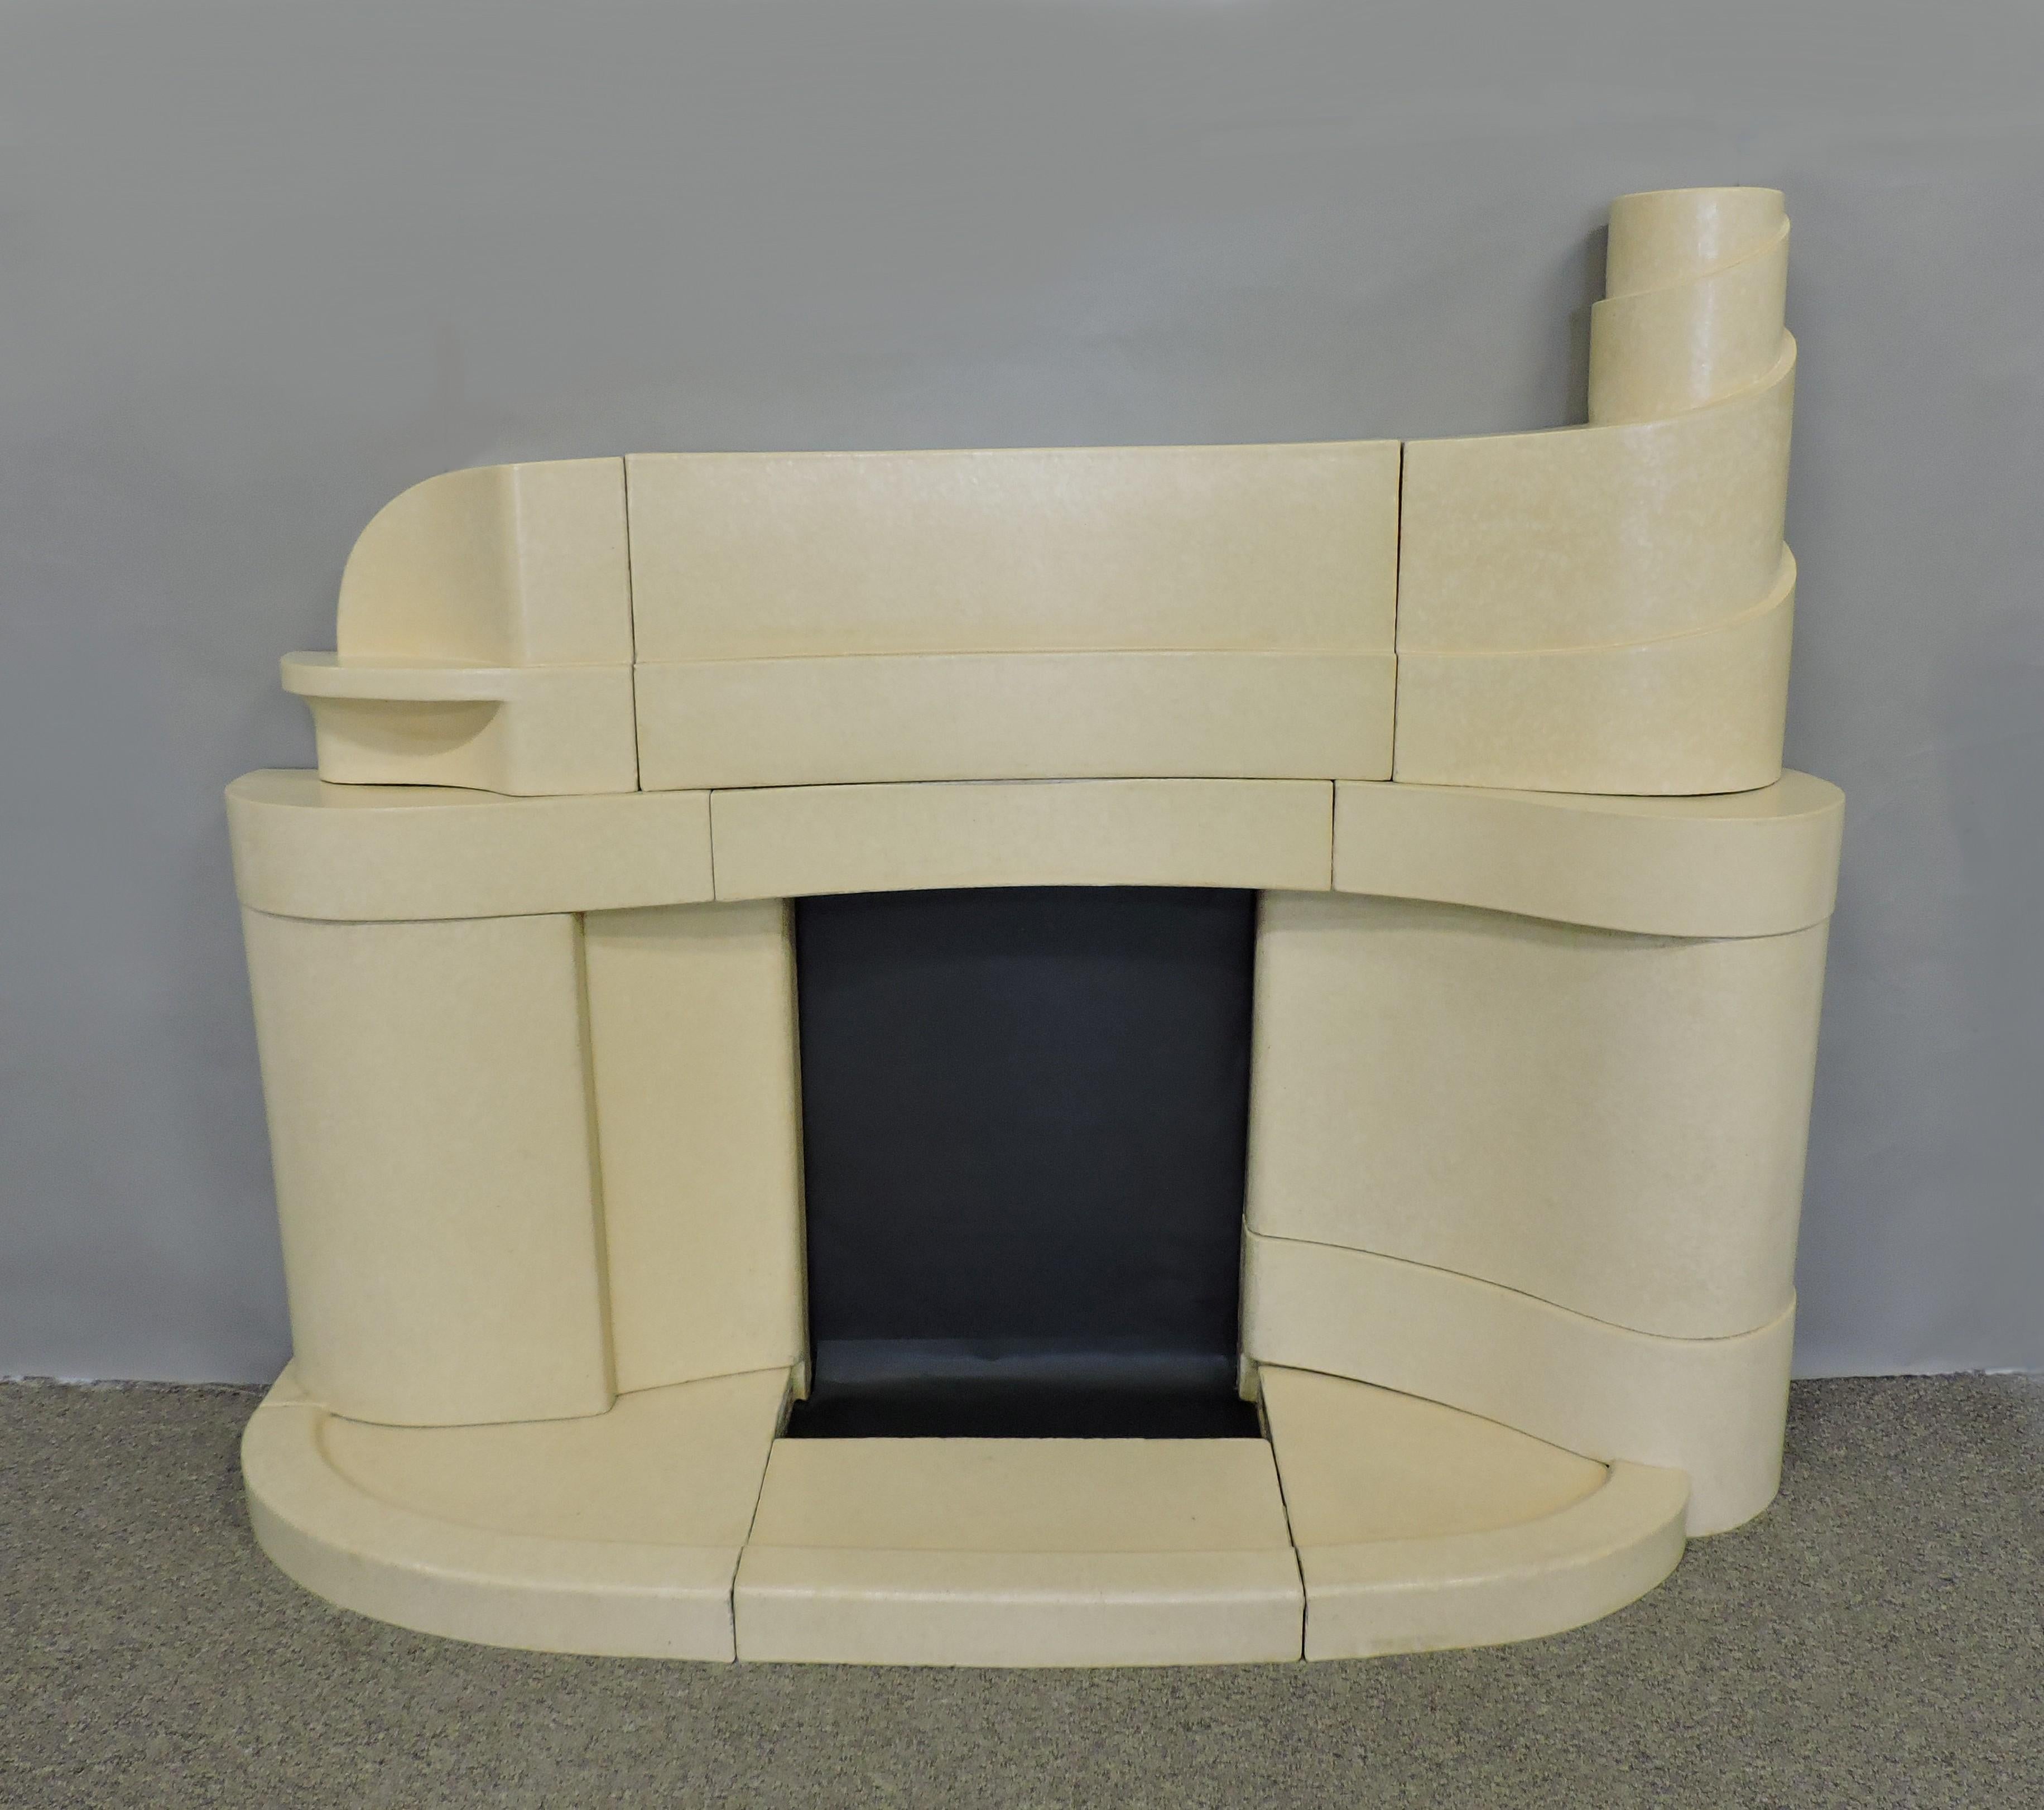 Stunning and unique Art Deco fireplace mantel in a curvaceous, stepped design. This mantel is made of ceramic faience block with a mottled beige and white glaze. The layers of curved shapes are reminiscent of a steamship. A real statement piece that